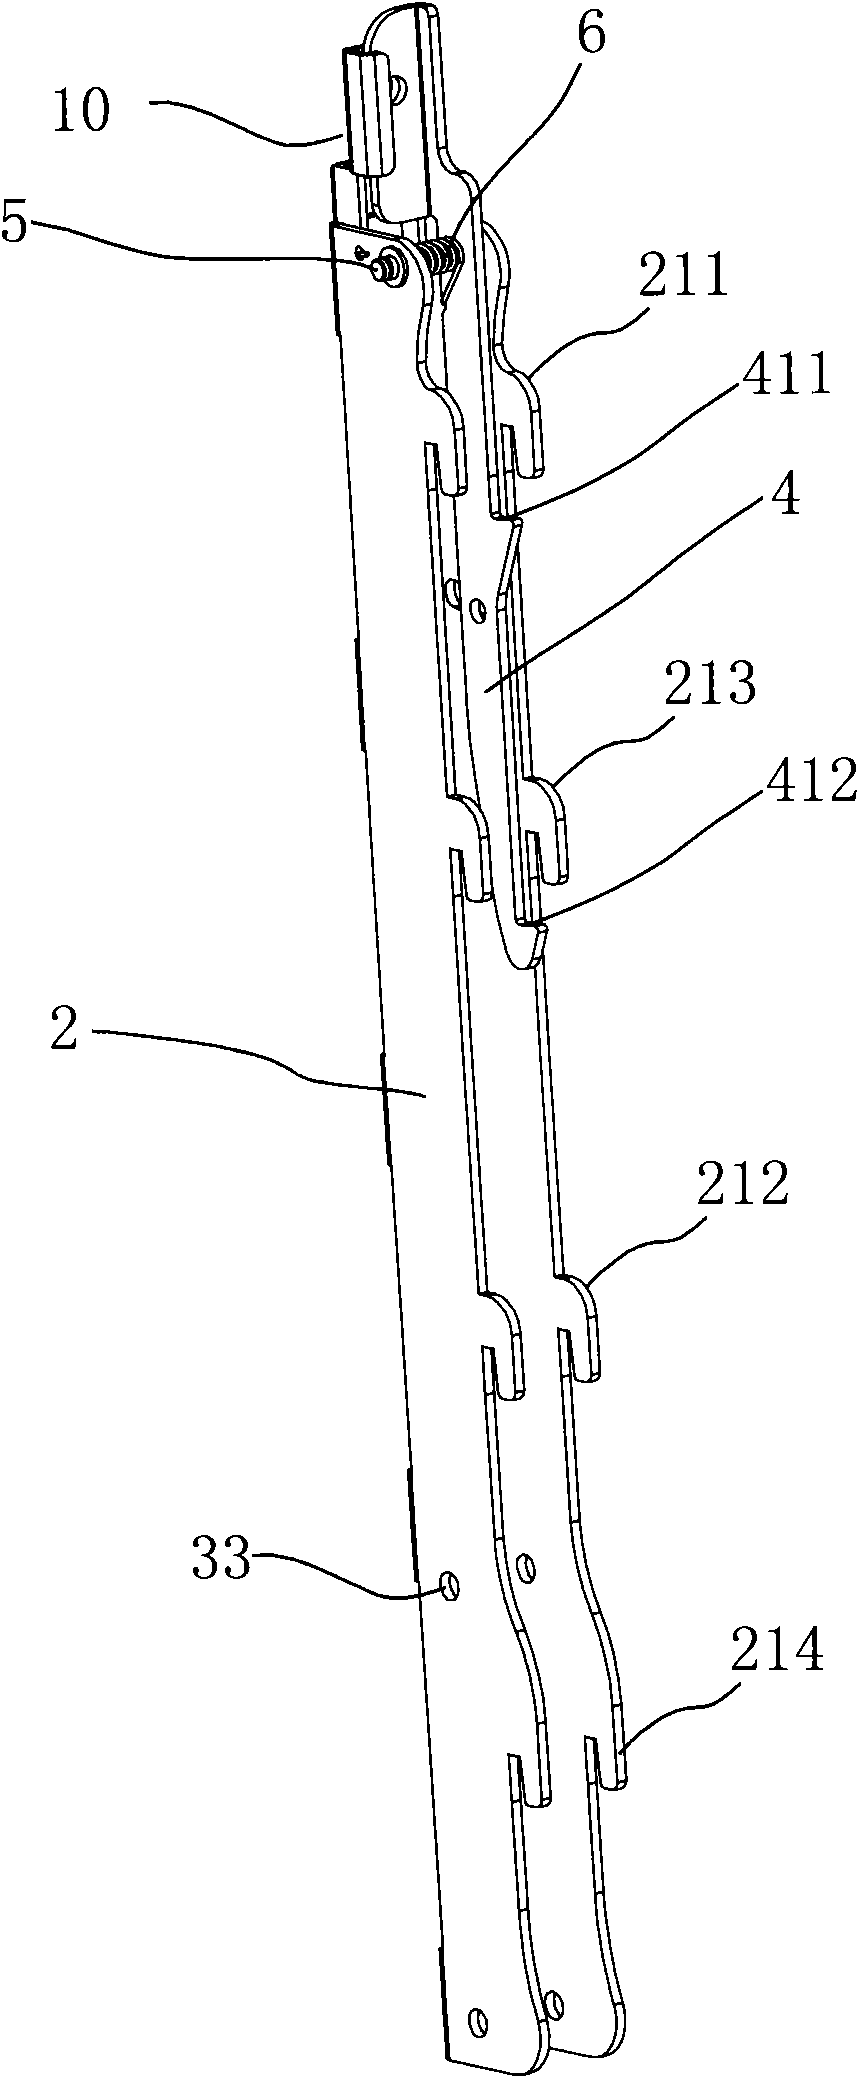 Self-locking wall hanging support with adjustable angle for flat panel display